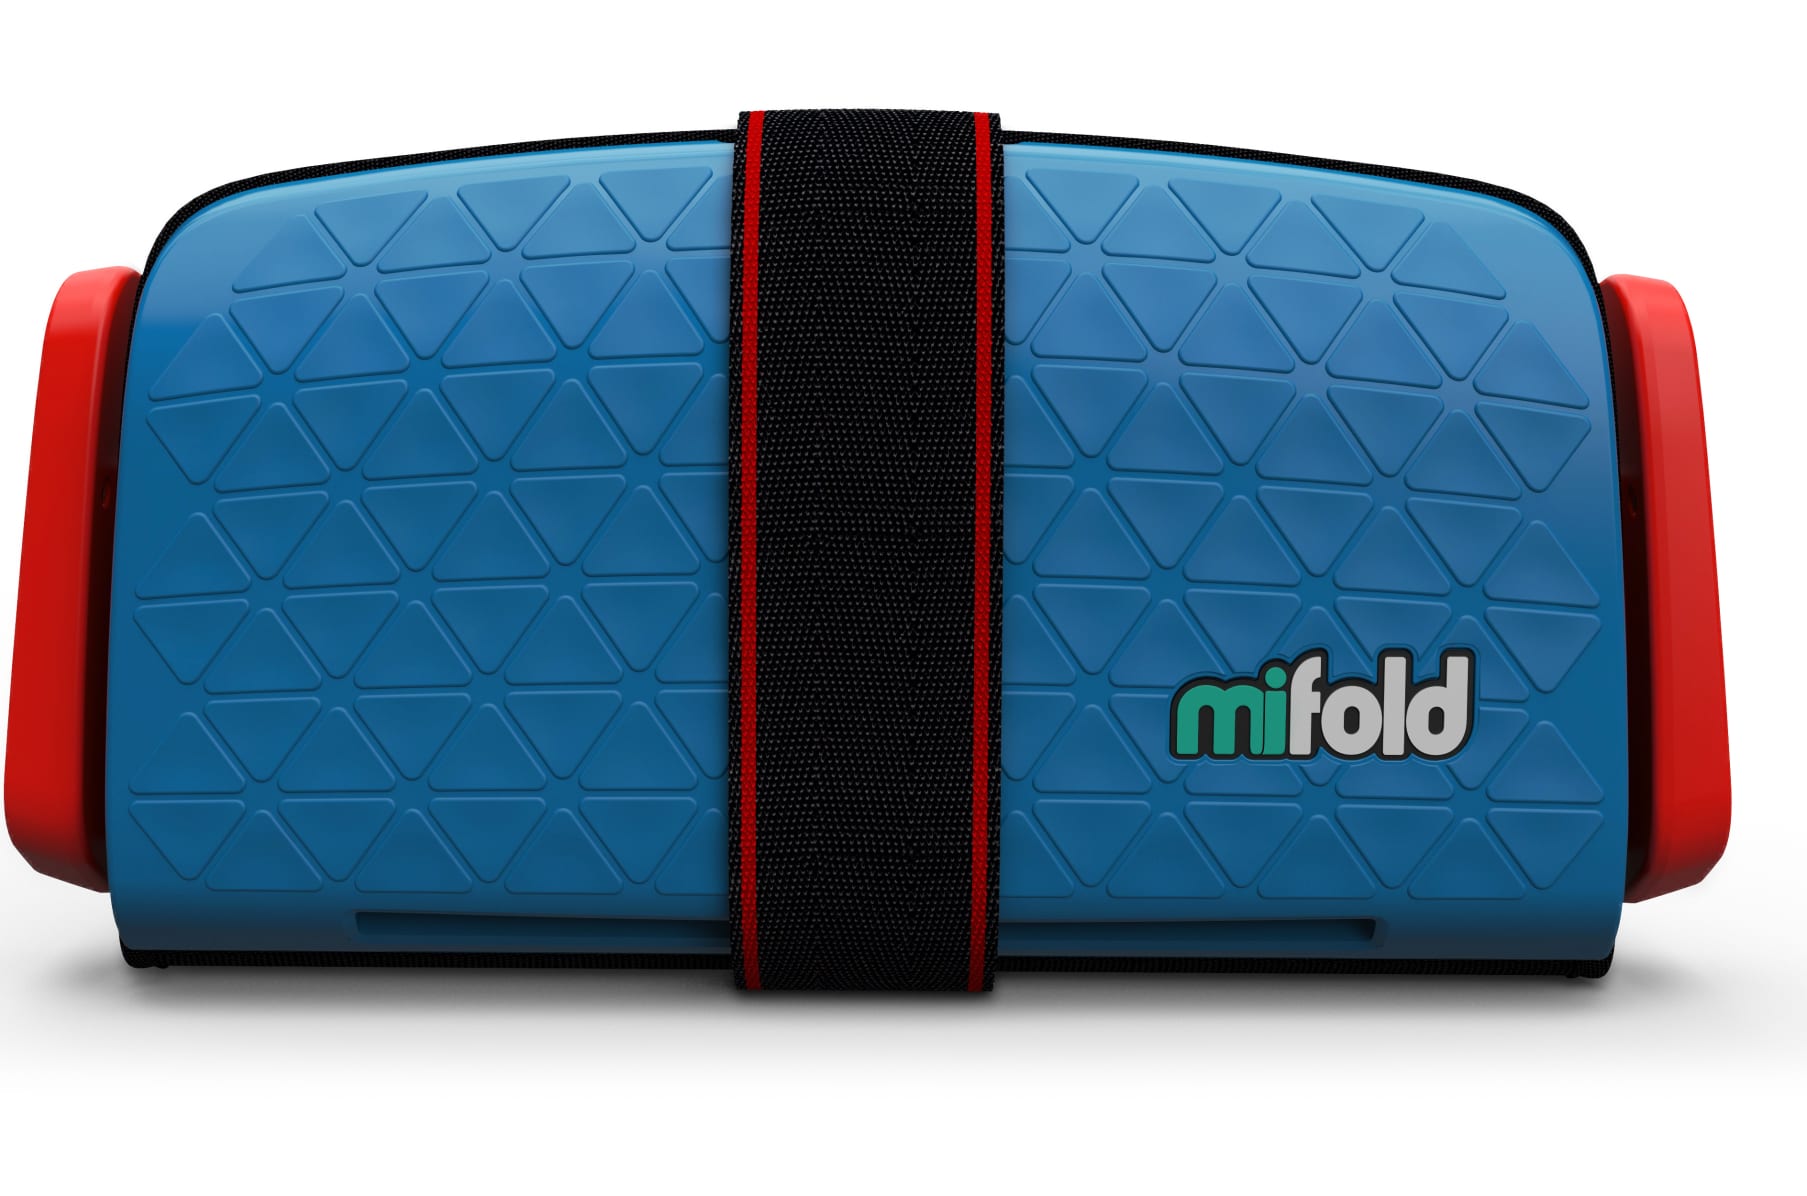 Mifold - a lightweight, portable car booster seat that fits in